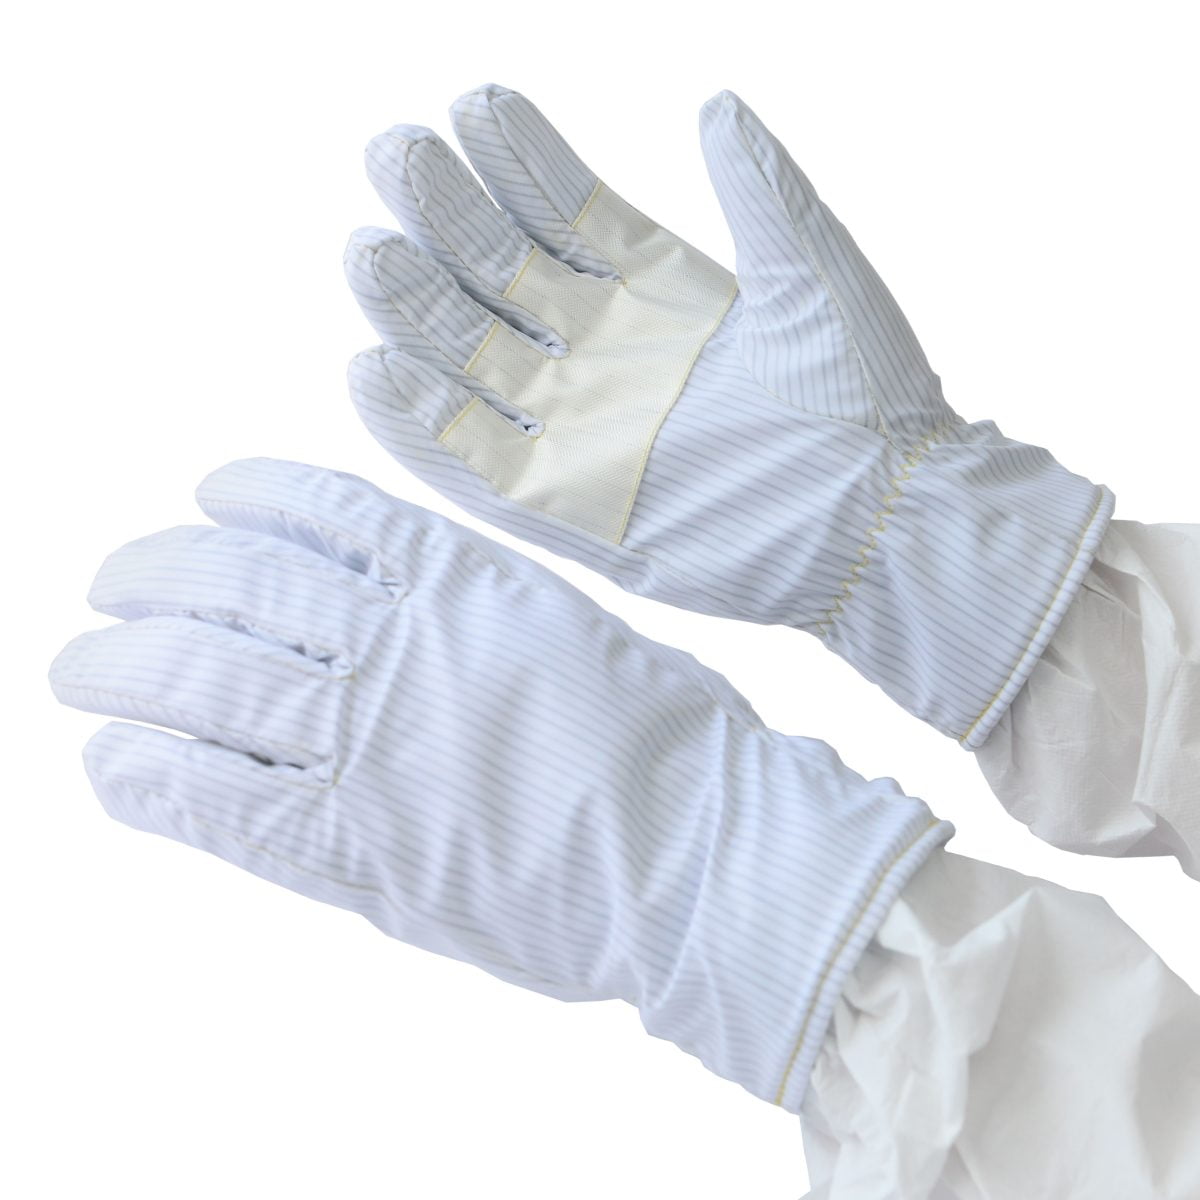 Integrity Cleanroom Heat Resistant Gloves, Up to 300°c